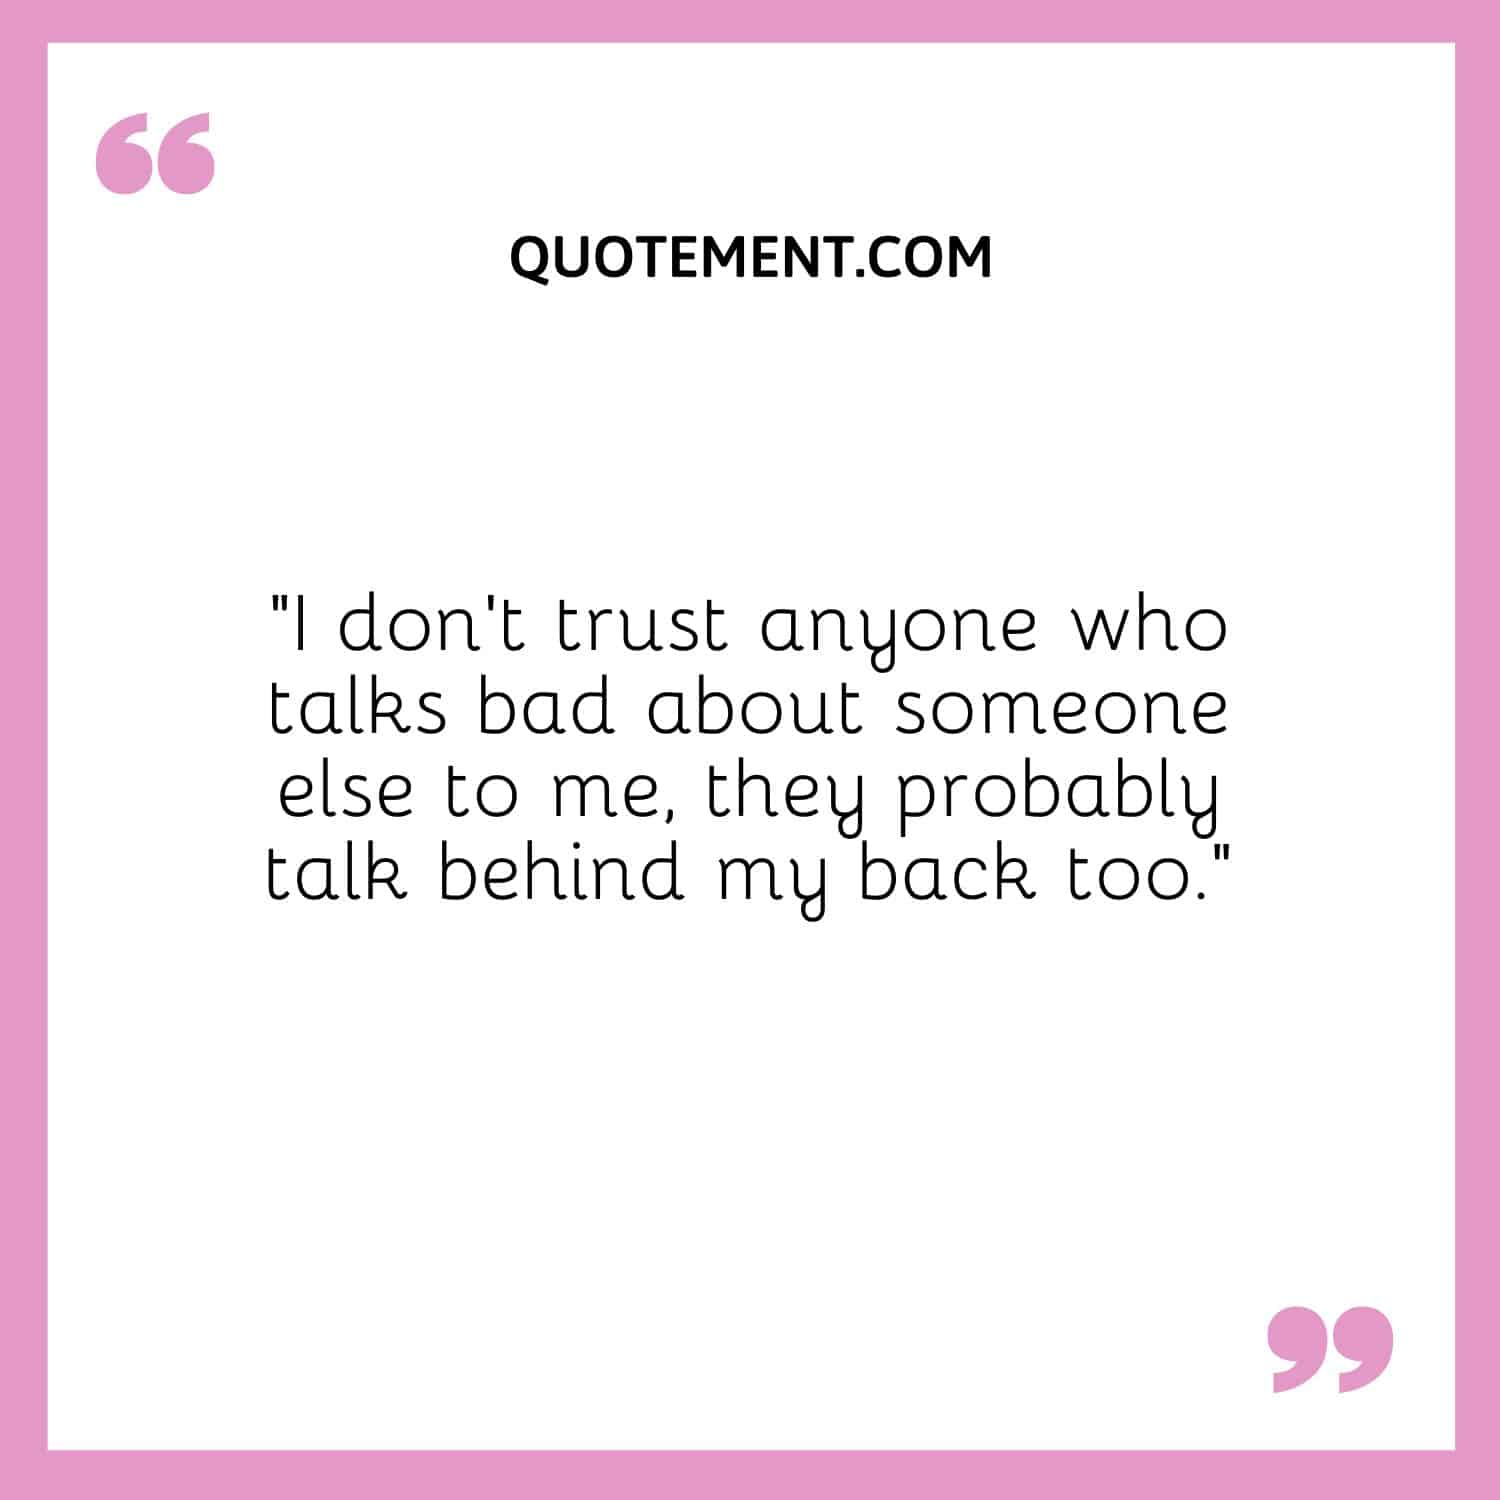 “I don’t trust anyone who talks bad about someone else to me, they probably talk behind my back too.”